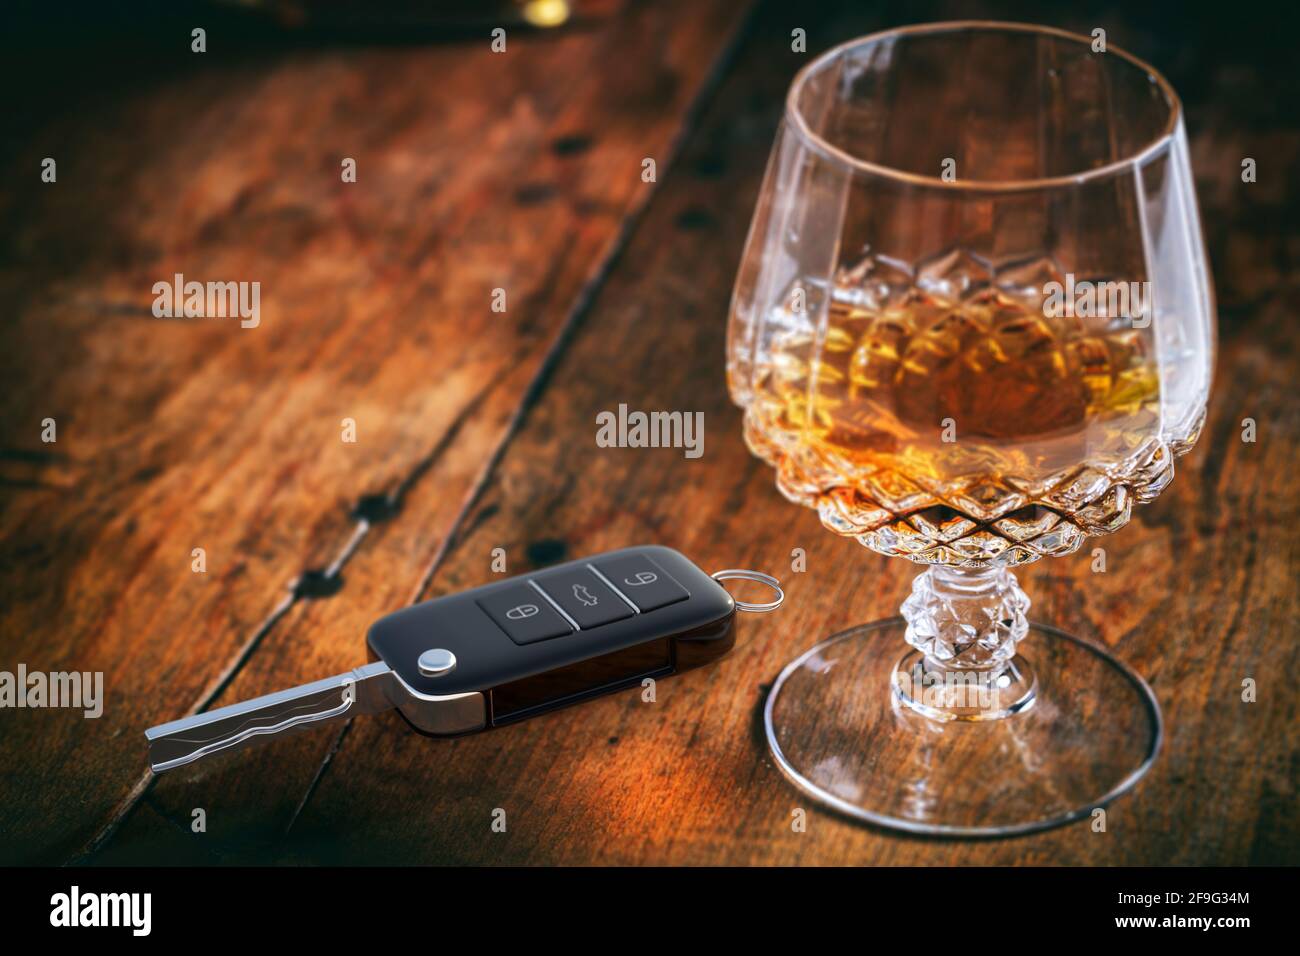 Alcohol drinking and driving concept. Car key and brandy glass on a wooden bar counter background. 3d illustration. Stock Photo